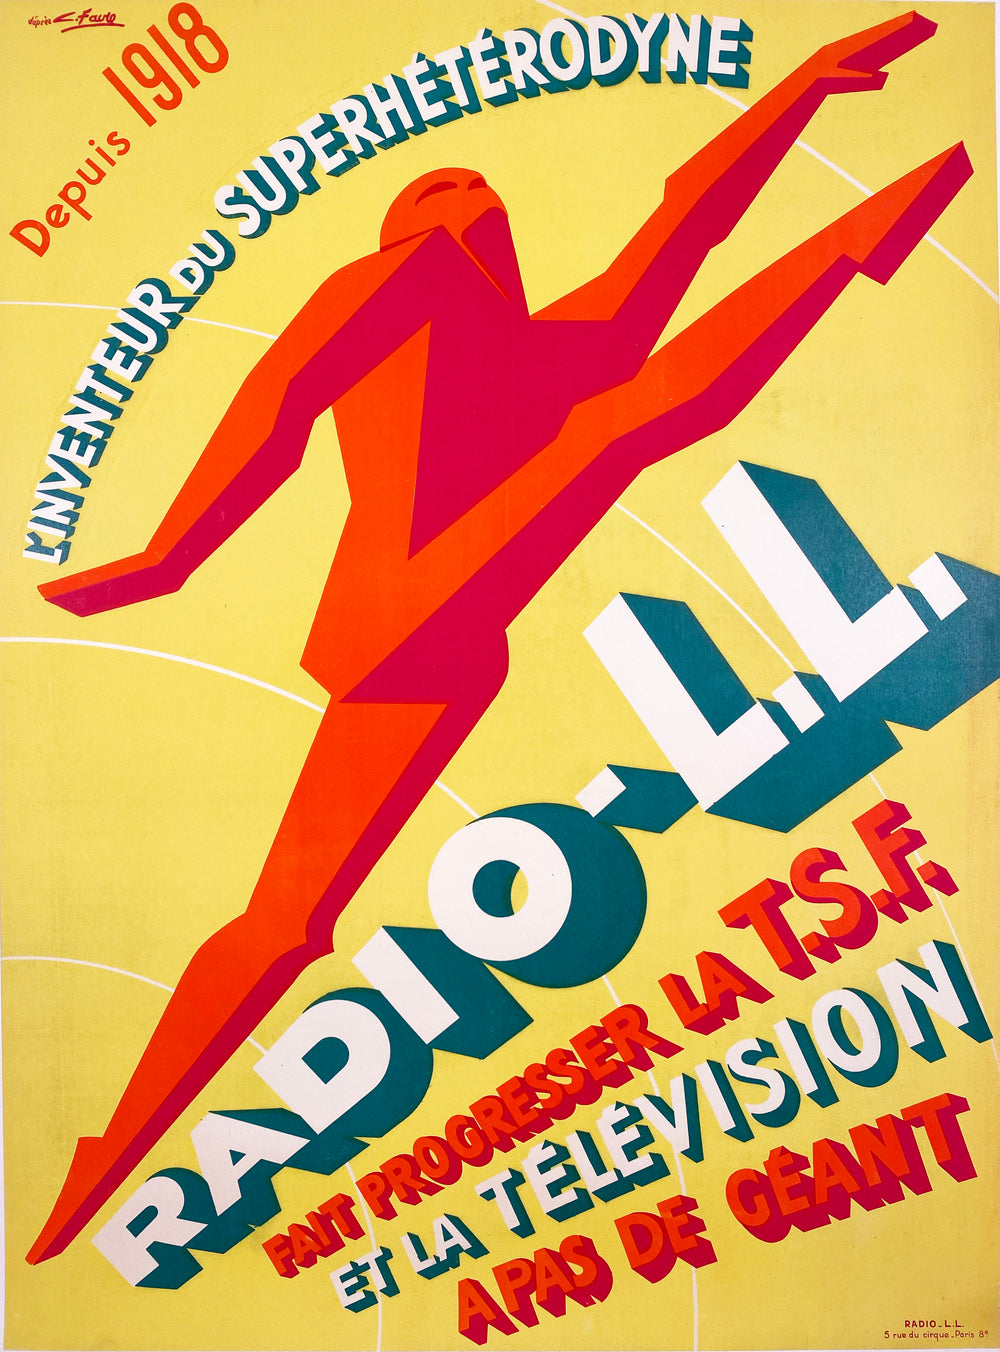 Radio L.L. - Vintage French Advertising poster by Favre 1940